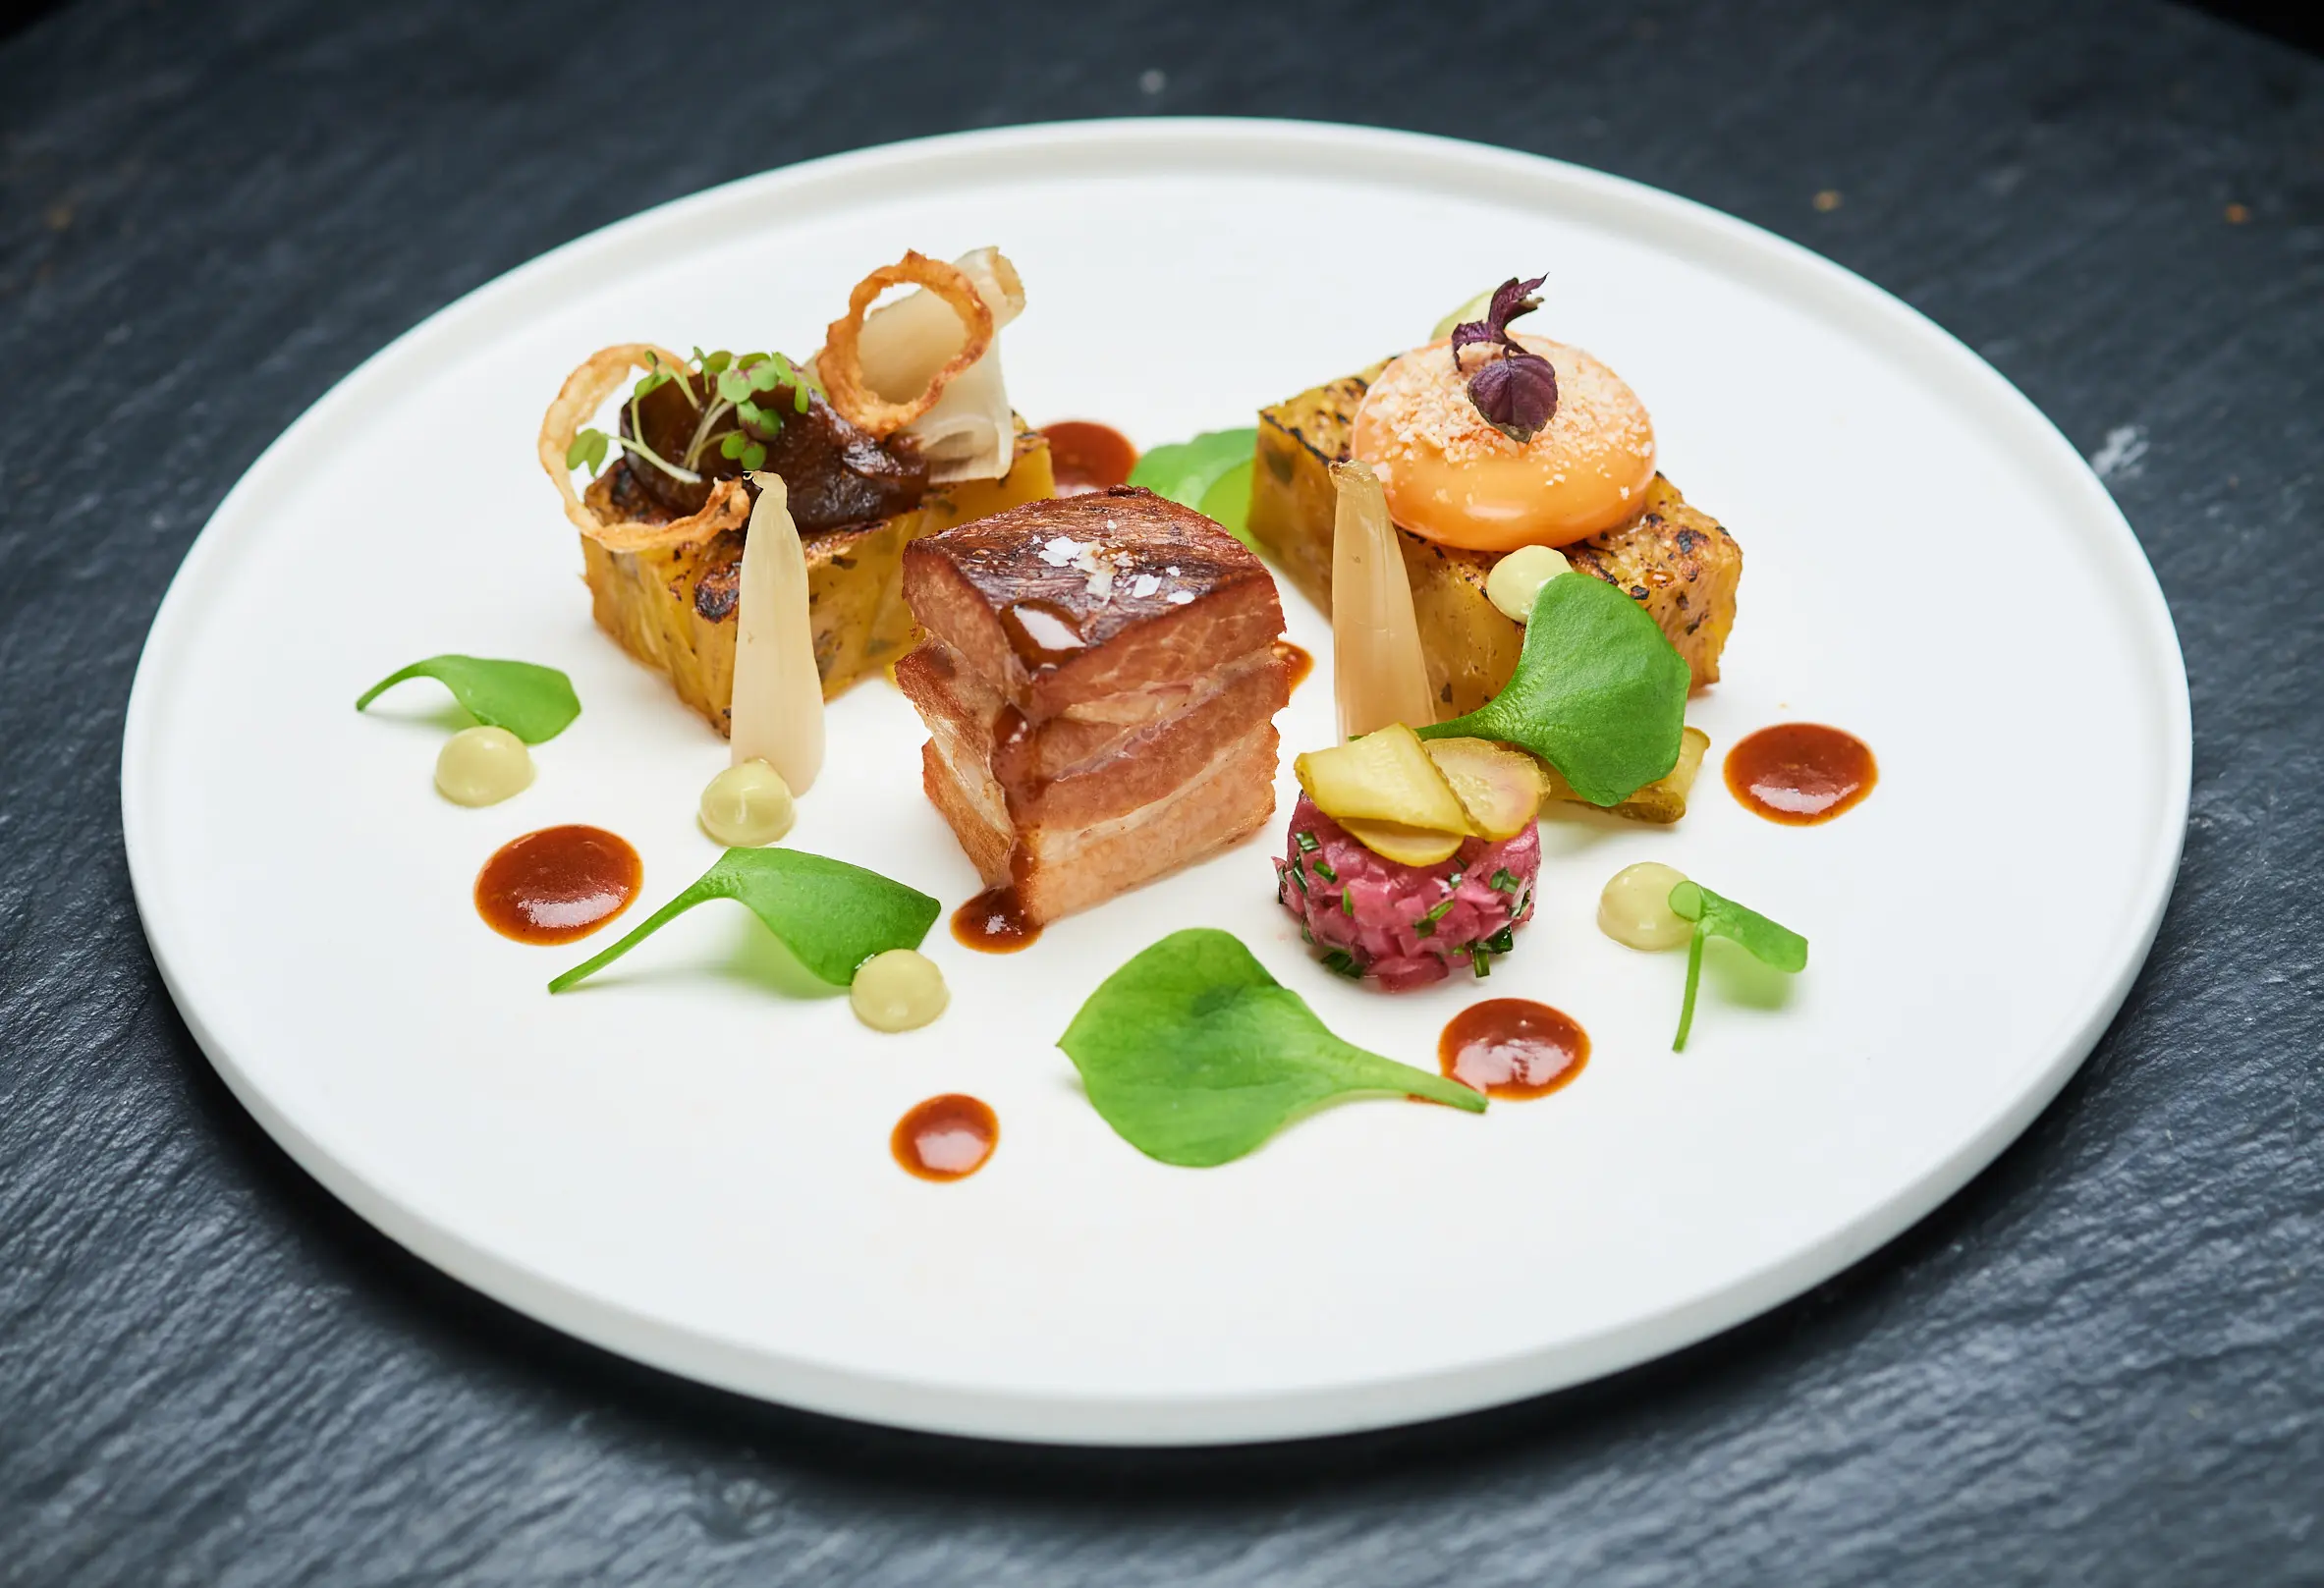 An exquisite composition of gourmet meat with vegetable sides on a white porcelain plate at Jolesch restaurant.